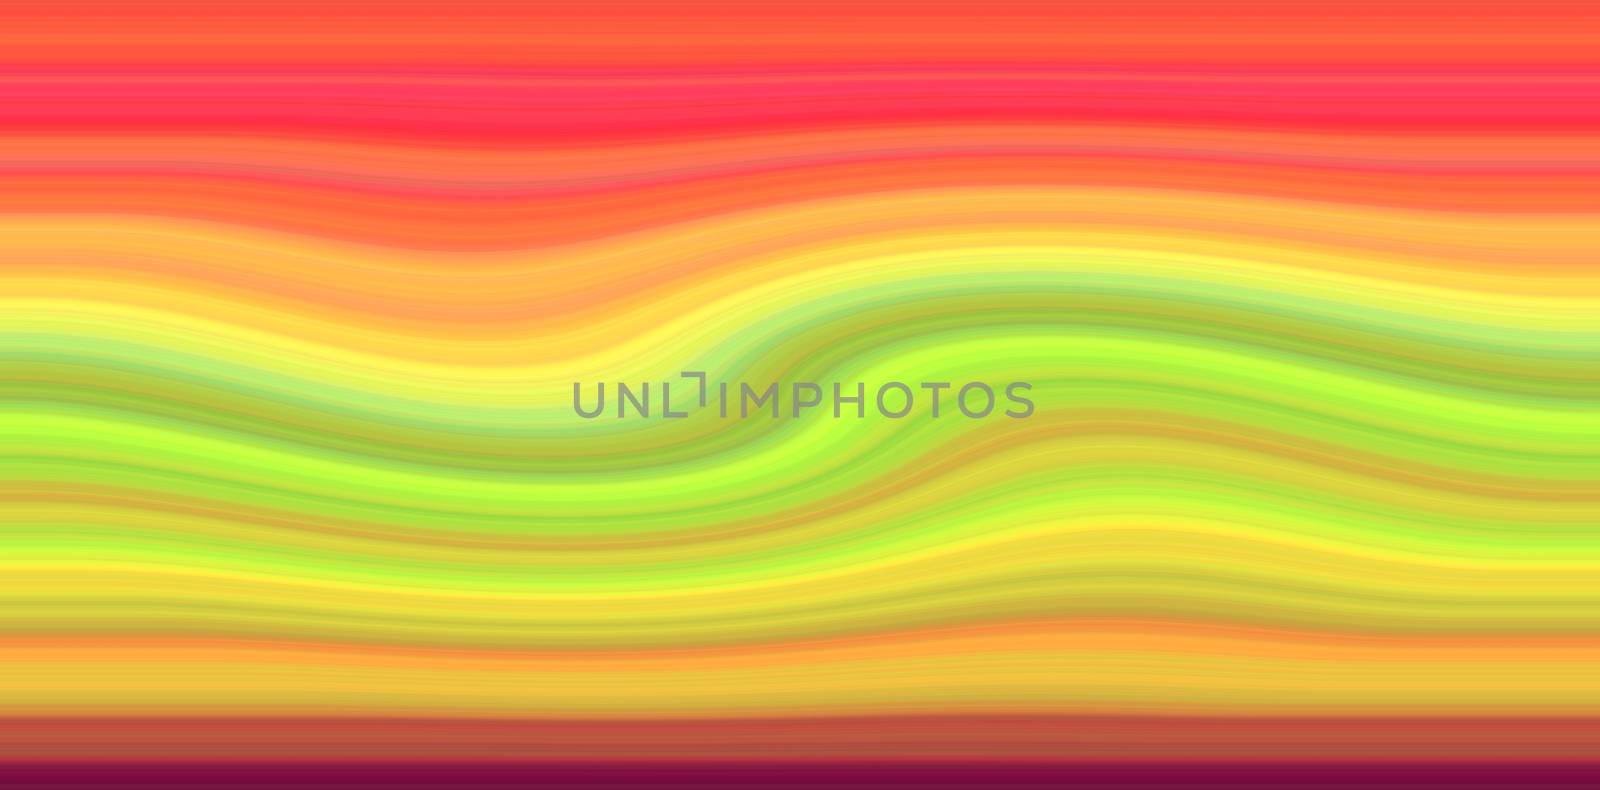 beautiful illustration of colored abstract background by a3701027